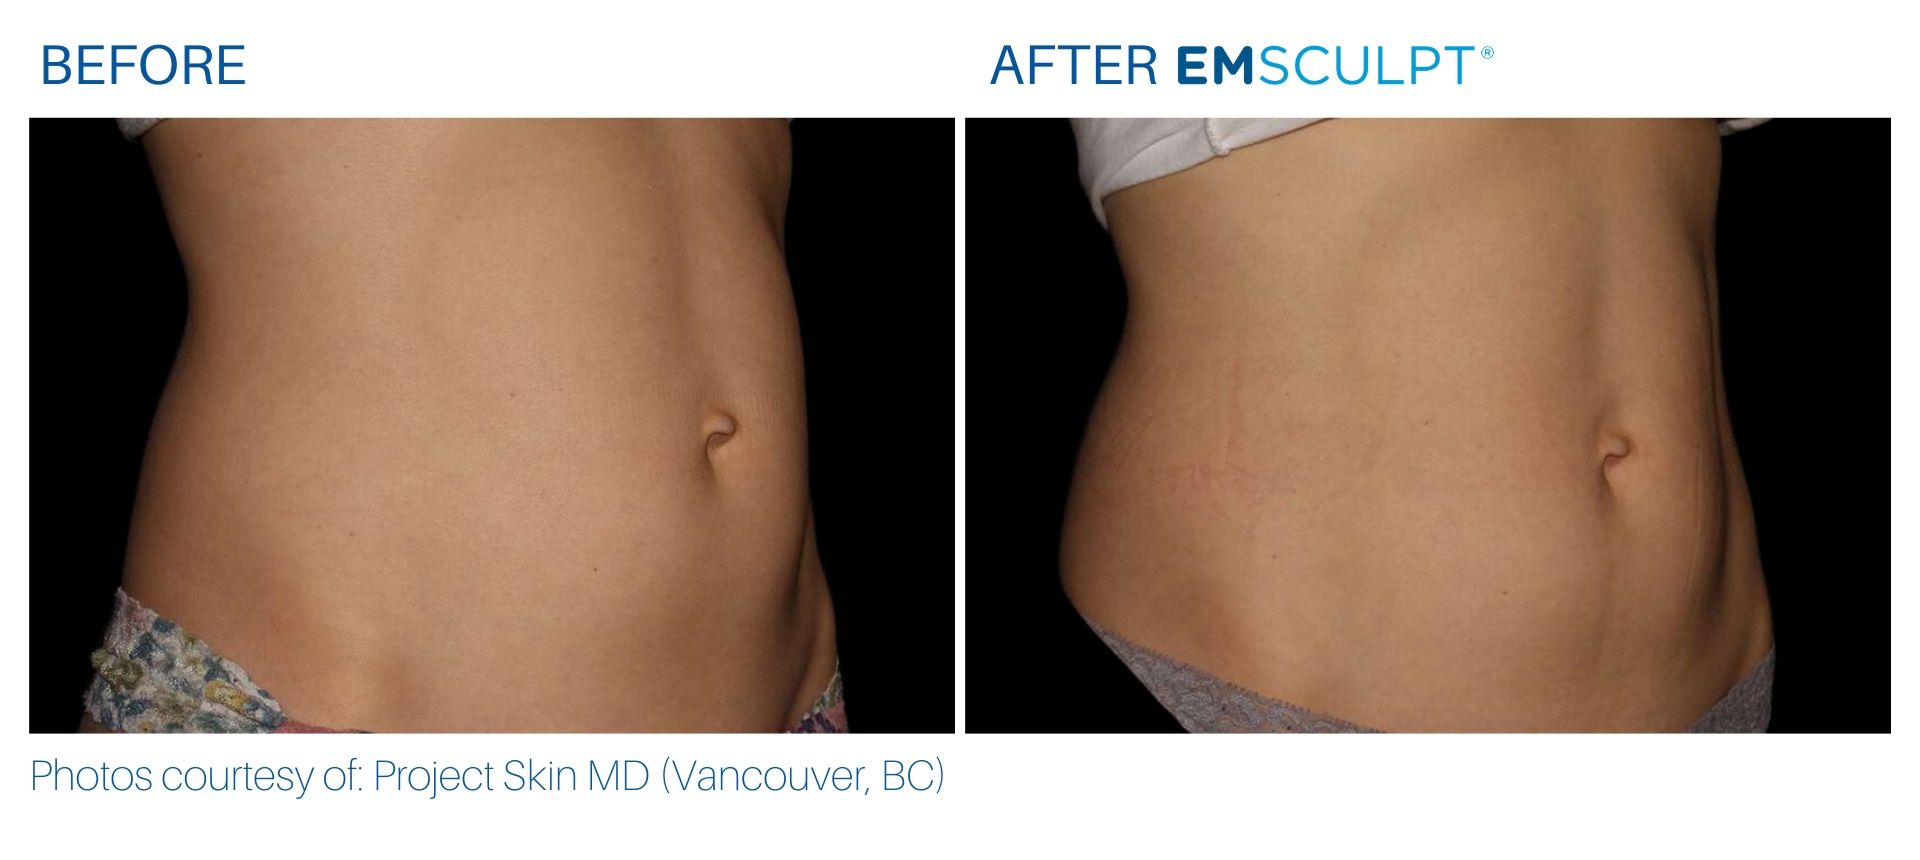 Emsculpt before and after results Body Morph MD